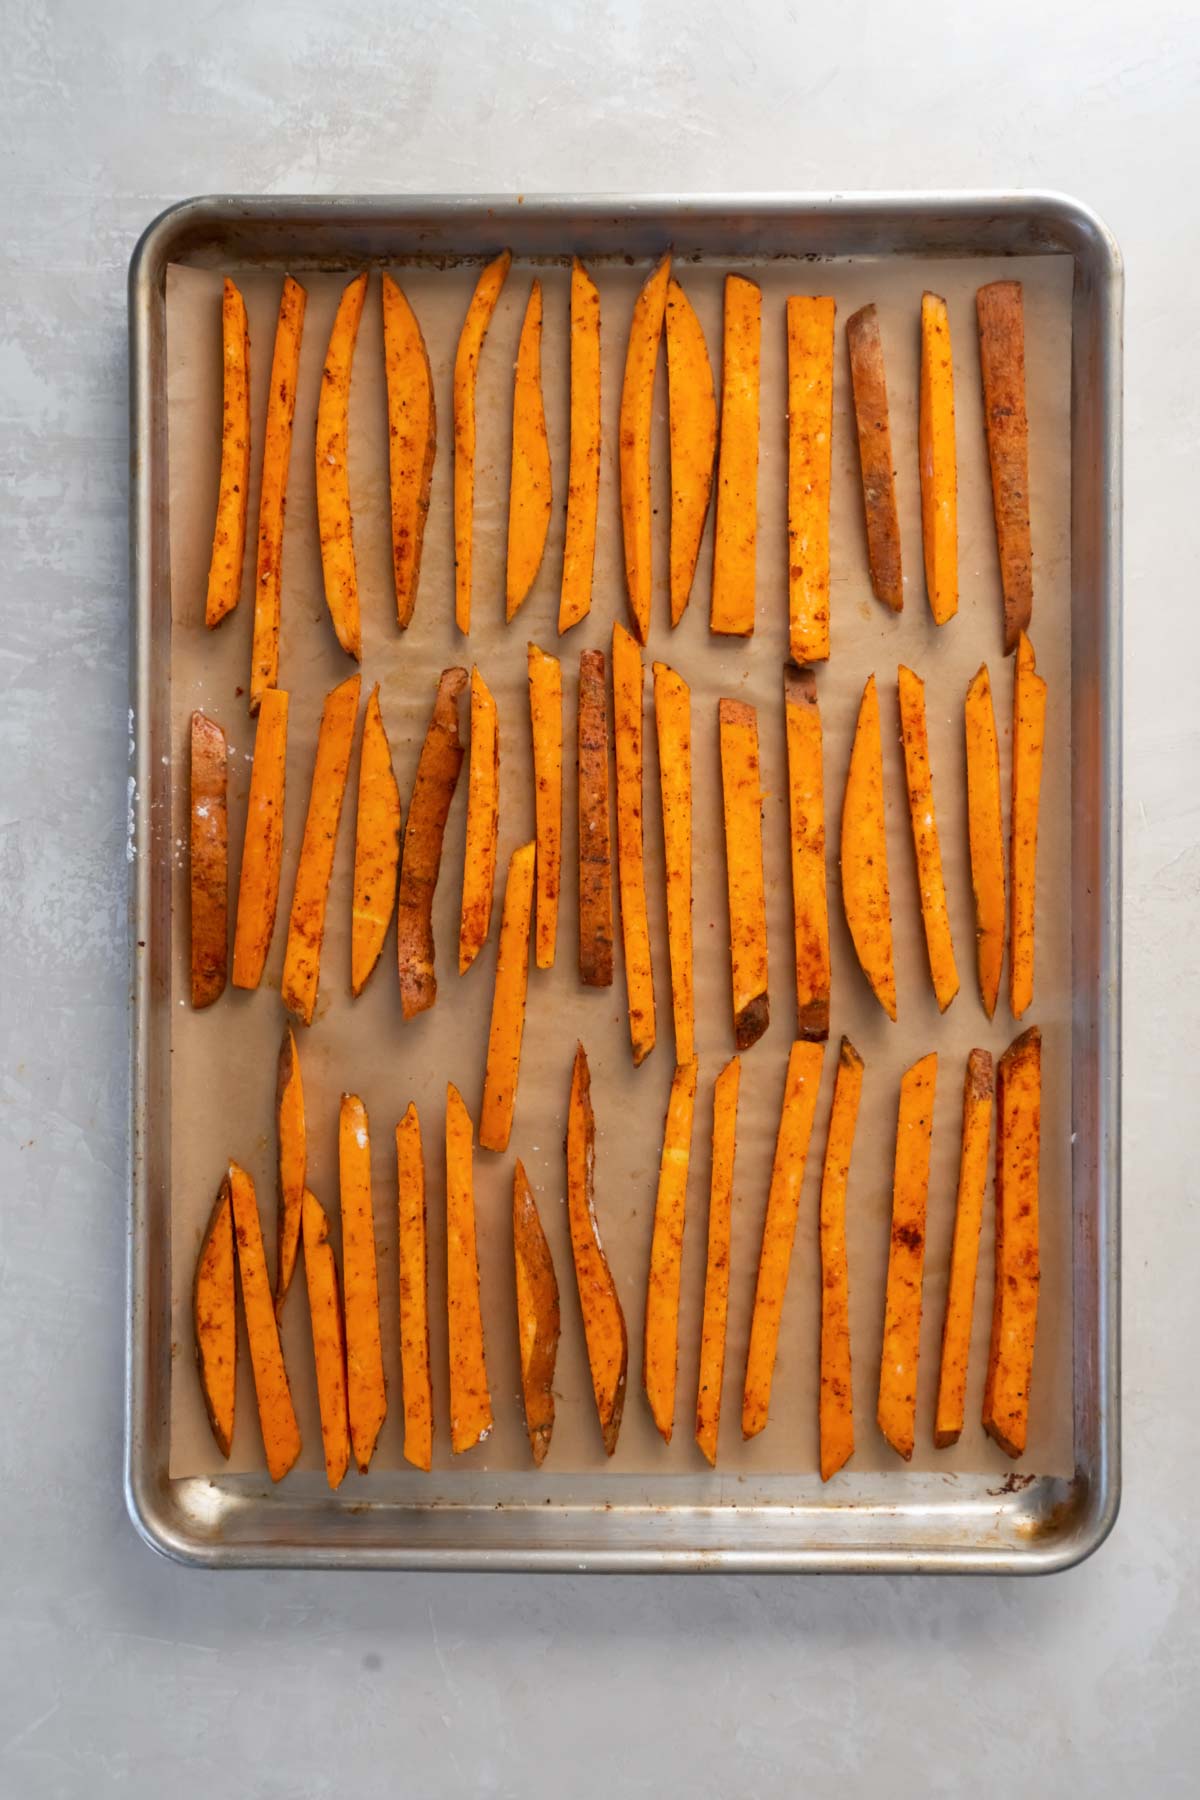 Unbaked sweet potato fries in a single layer on baking sheet.